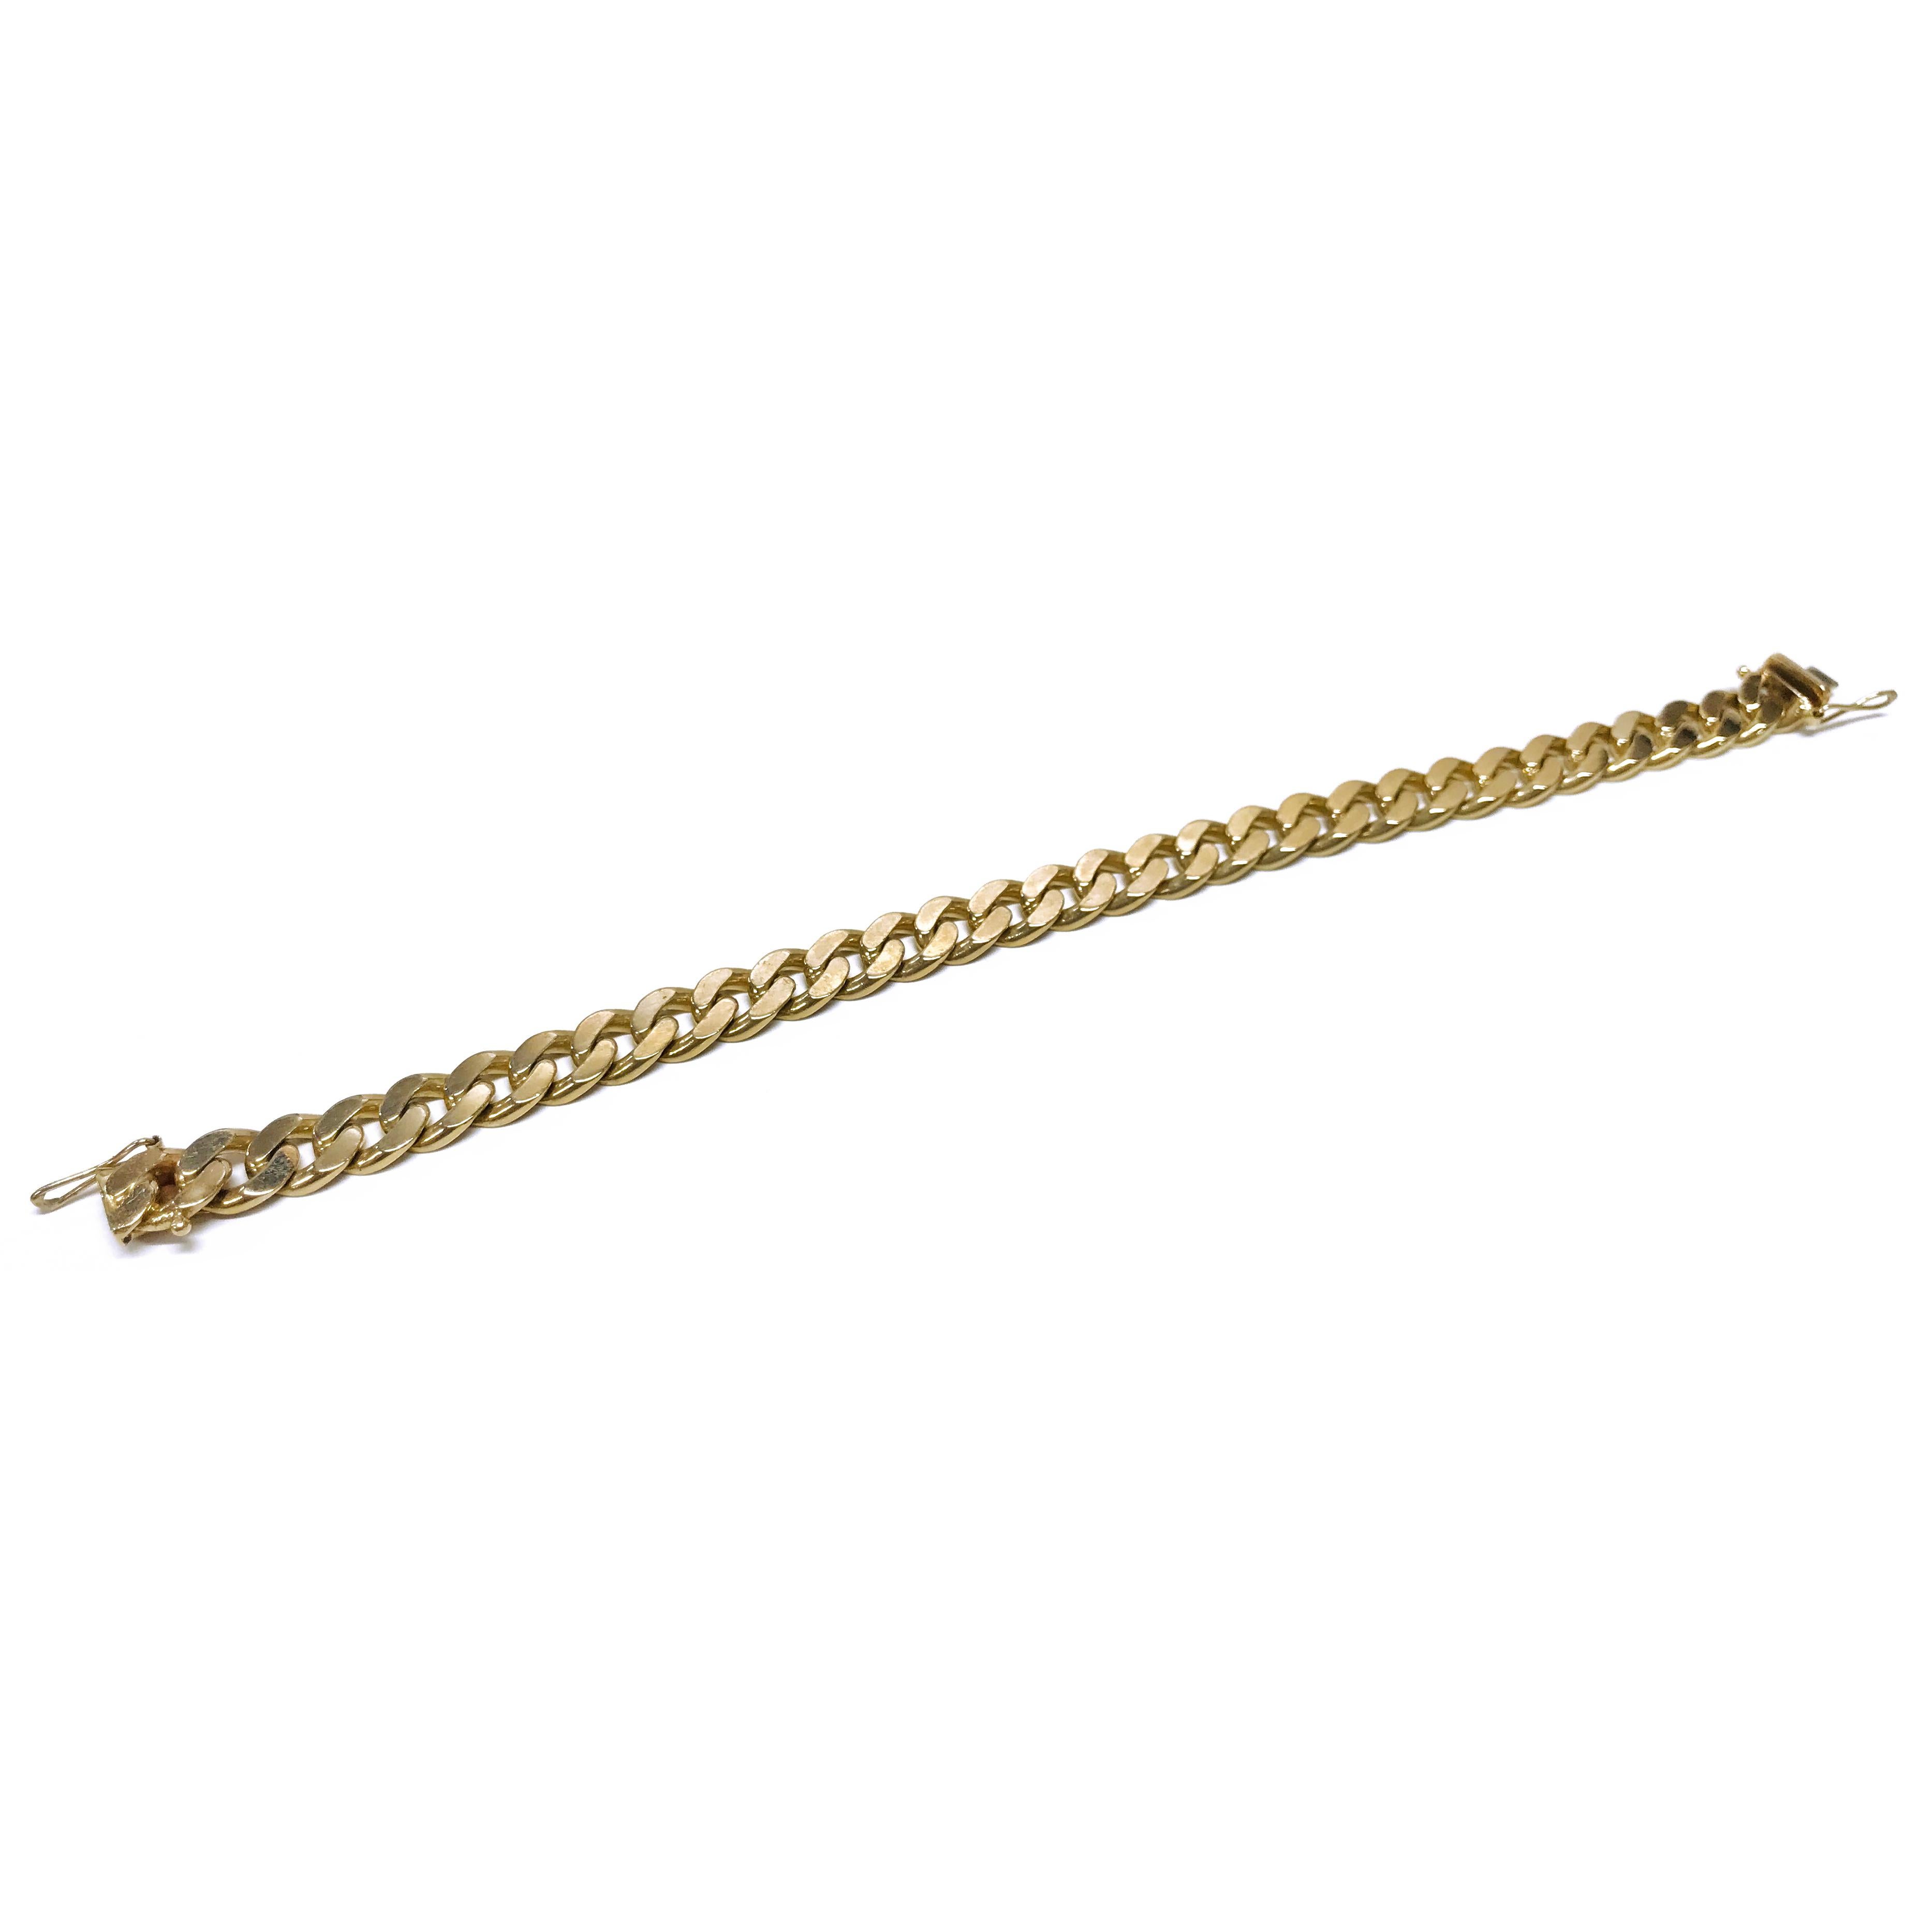 14 Karat Flat-Curb Link Bracelet. This bracelet features 8.8mm flat-curbed links. The top of the bracelet links is a shiny finish while the bottom is a matte finish. The bracelet is 8